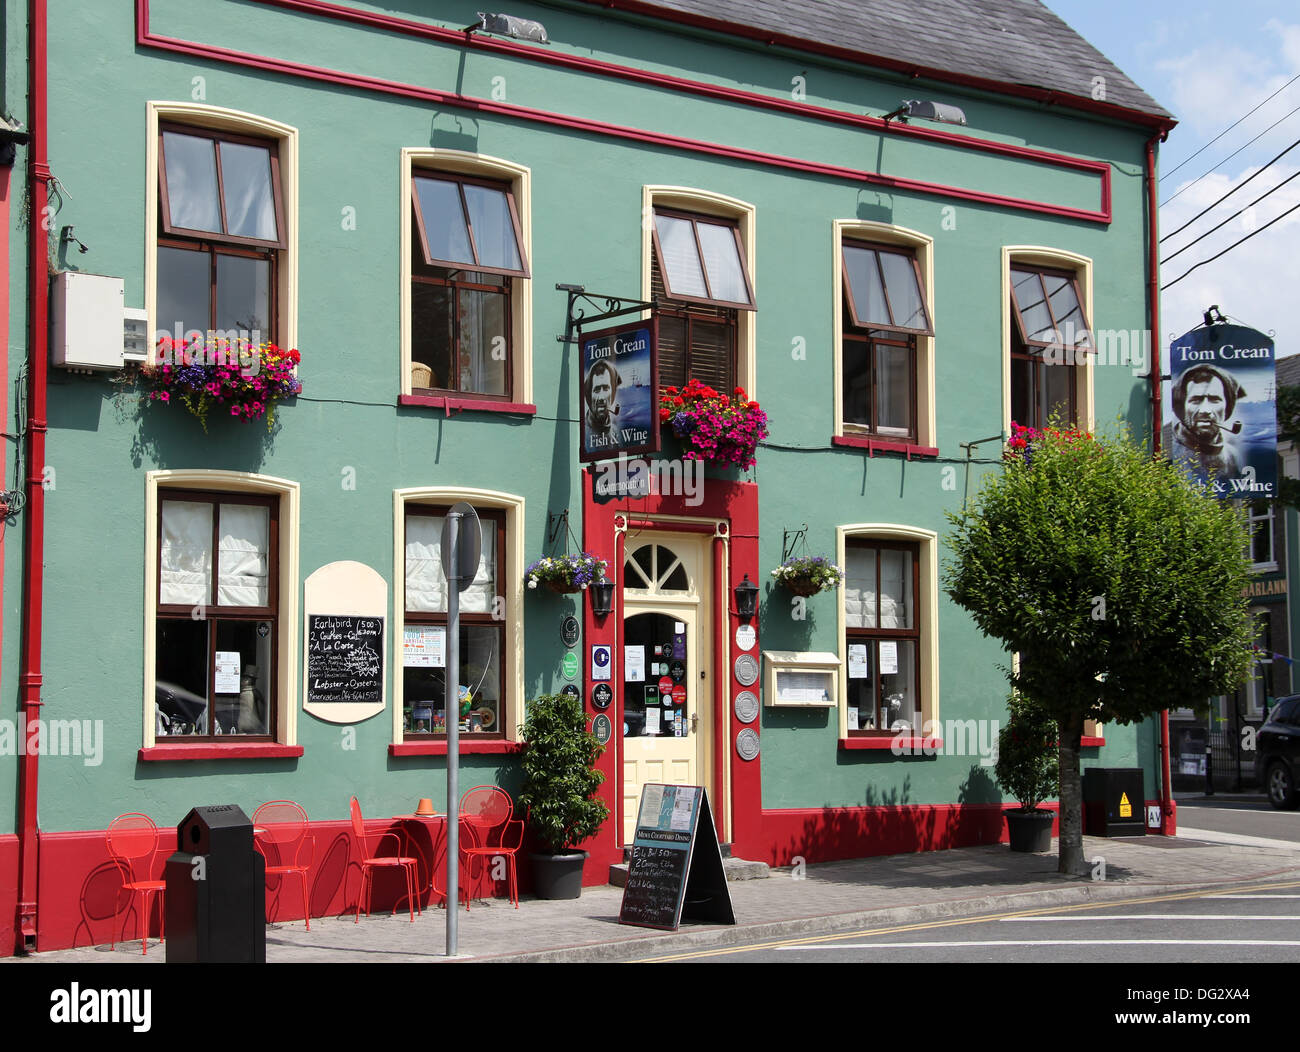 Tom Crean Fish and Wine Restaurant in the west of Ireland town of Kenmare  Stock Photo - Alamy